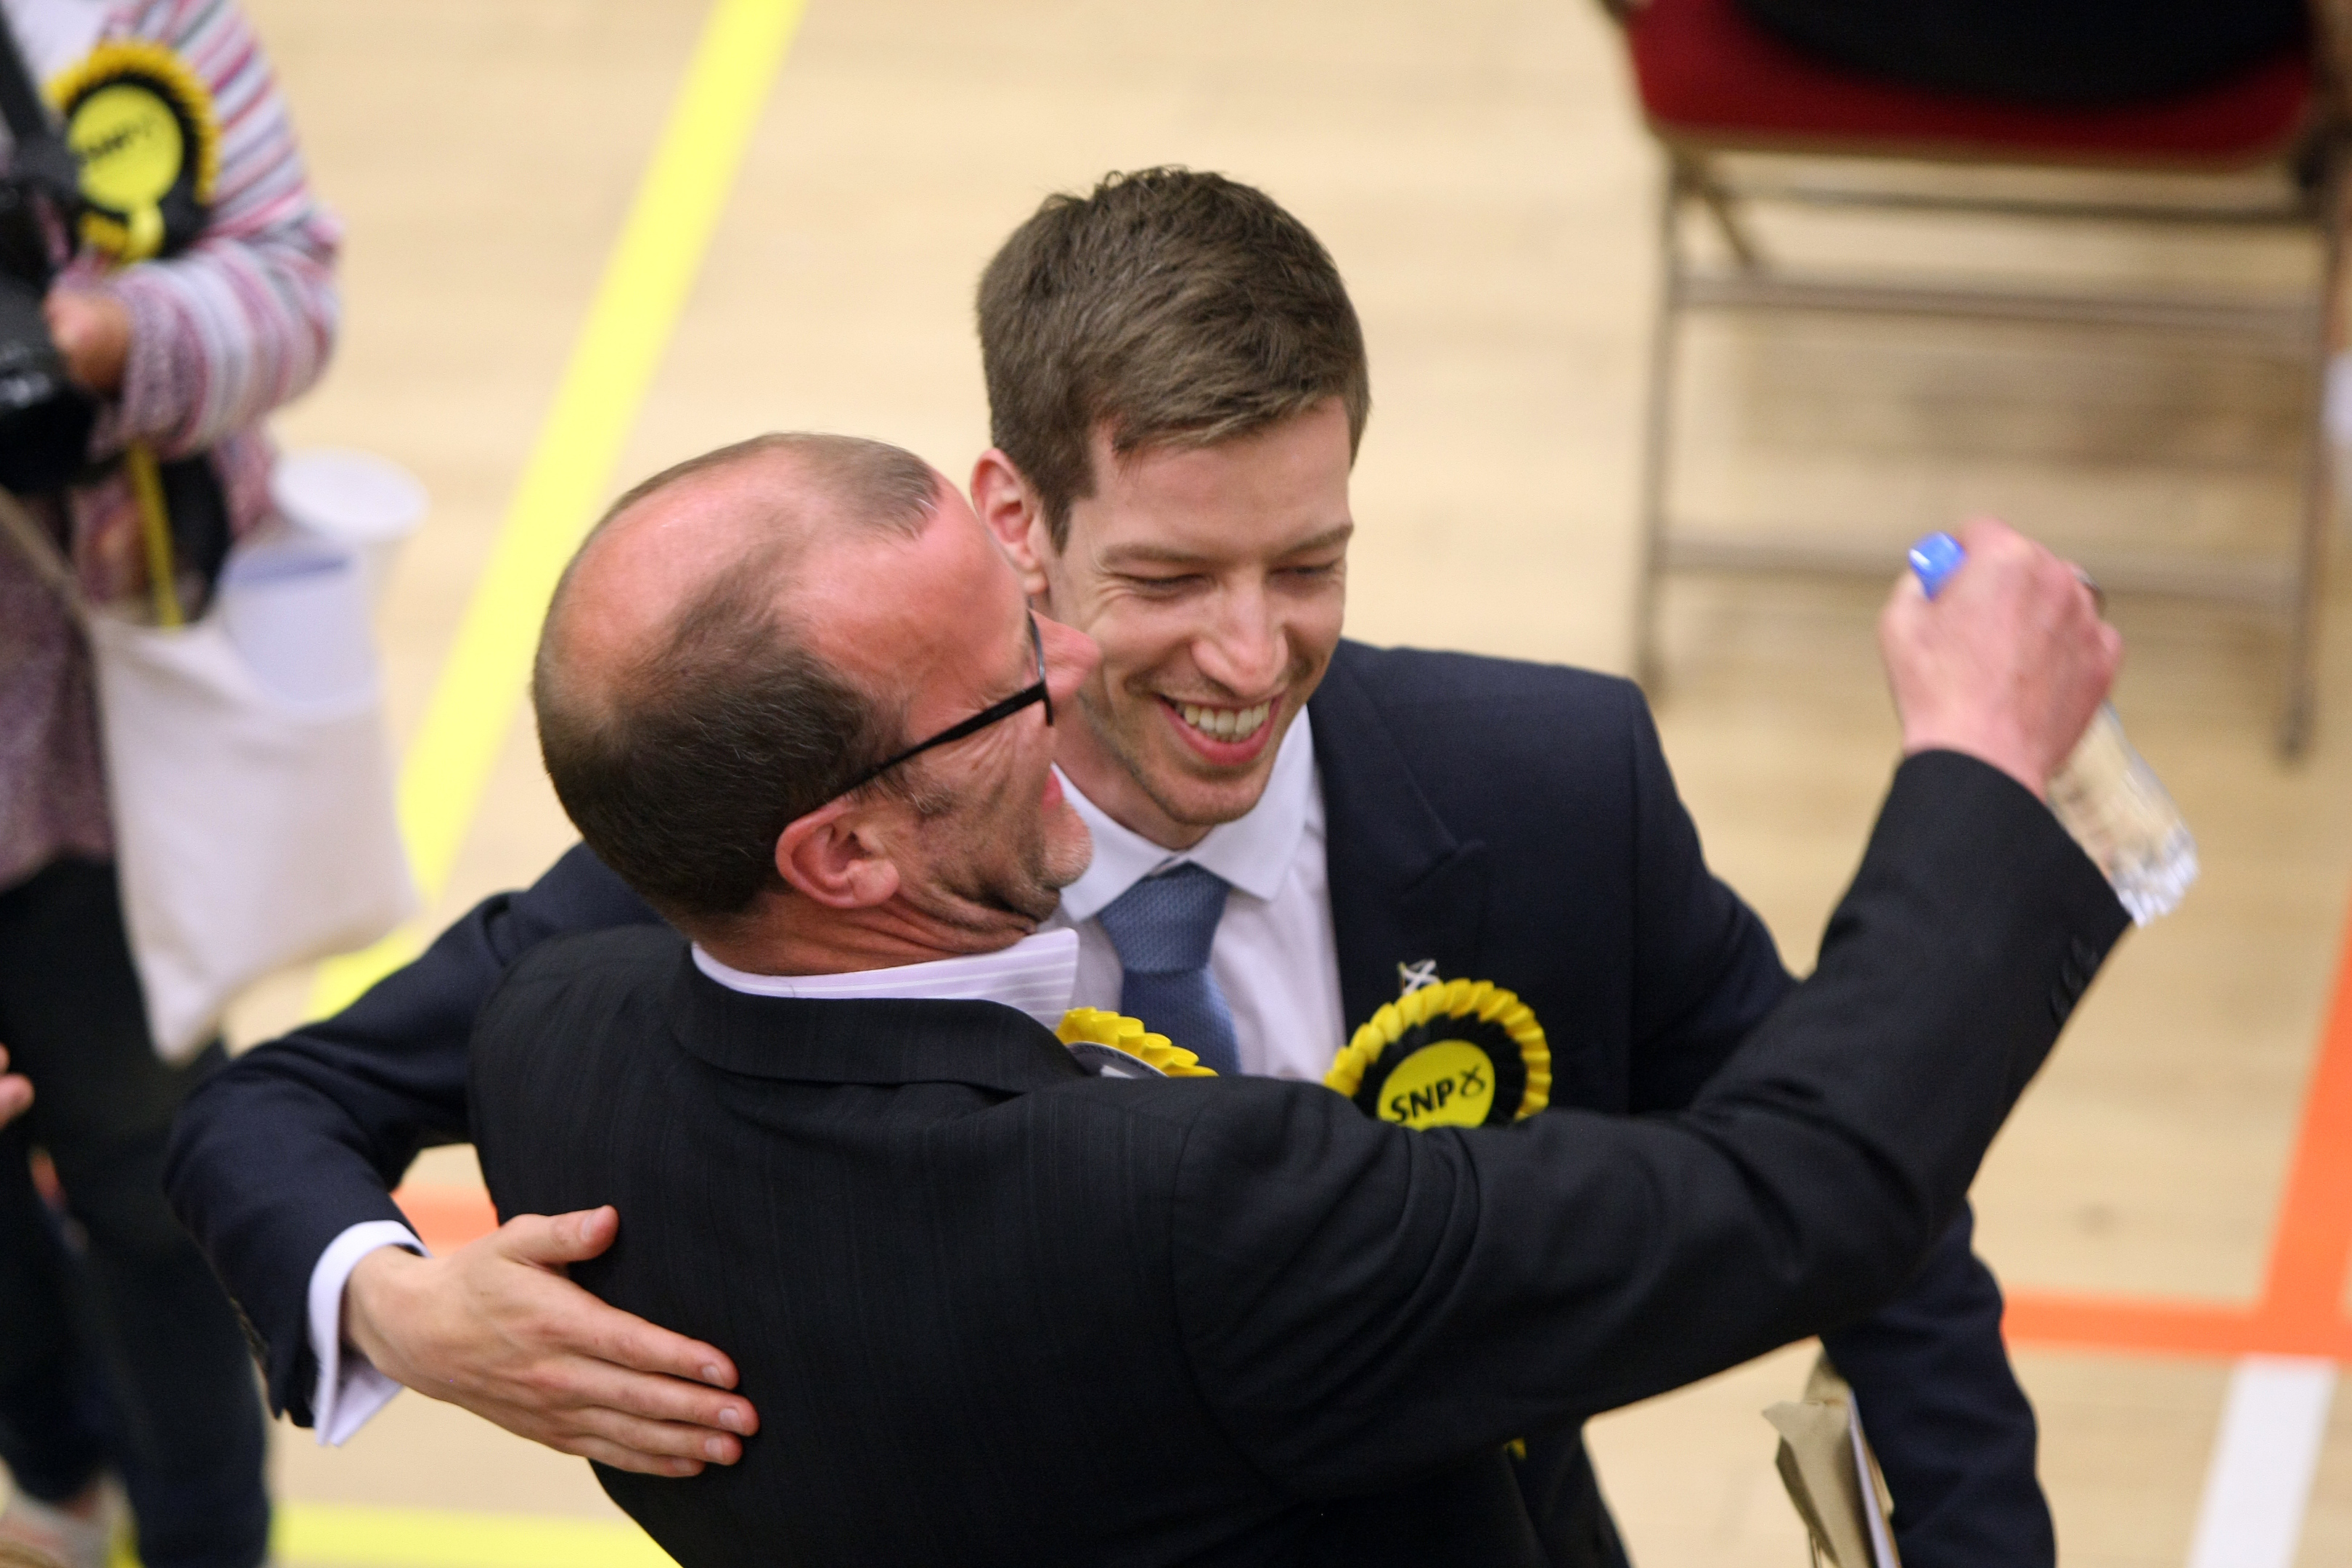 They may have lost their overall majority but the SNP, and their Dundee group leader John Alexander, still have plenty to smile about.